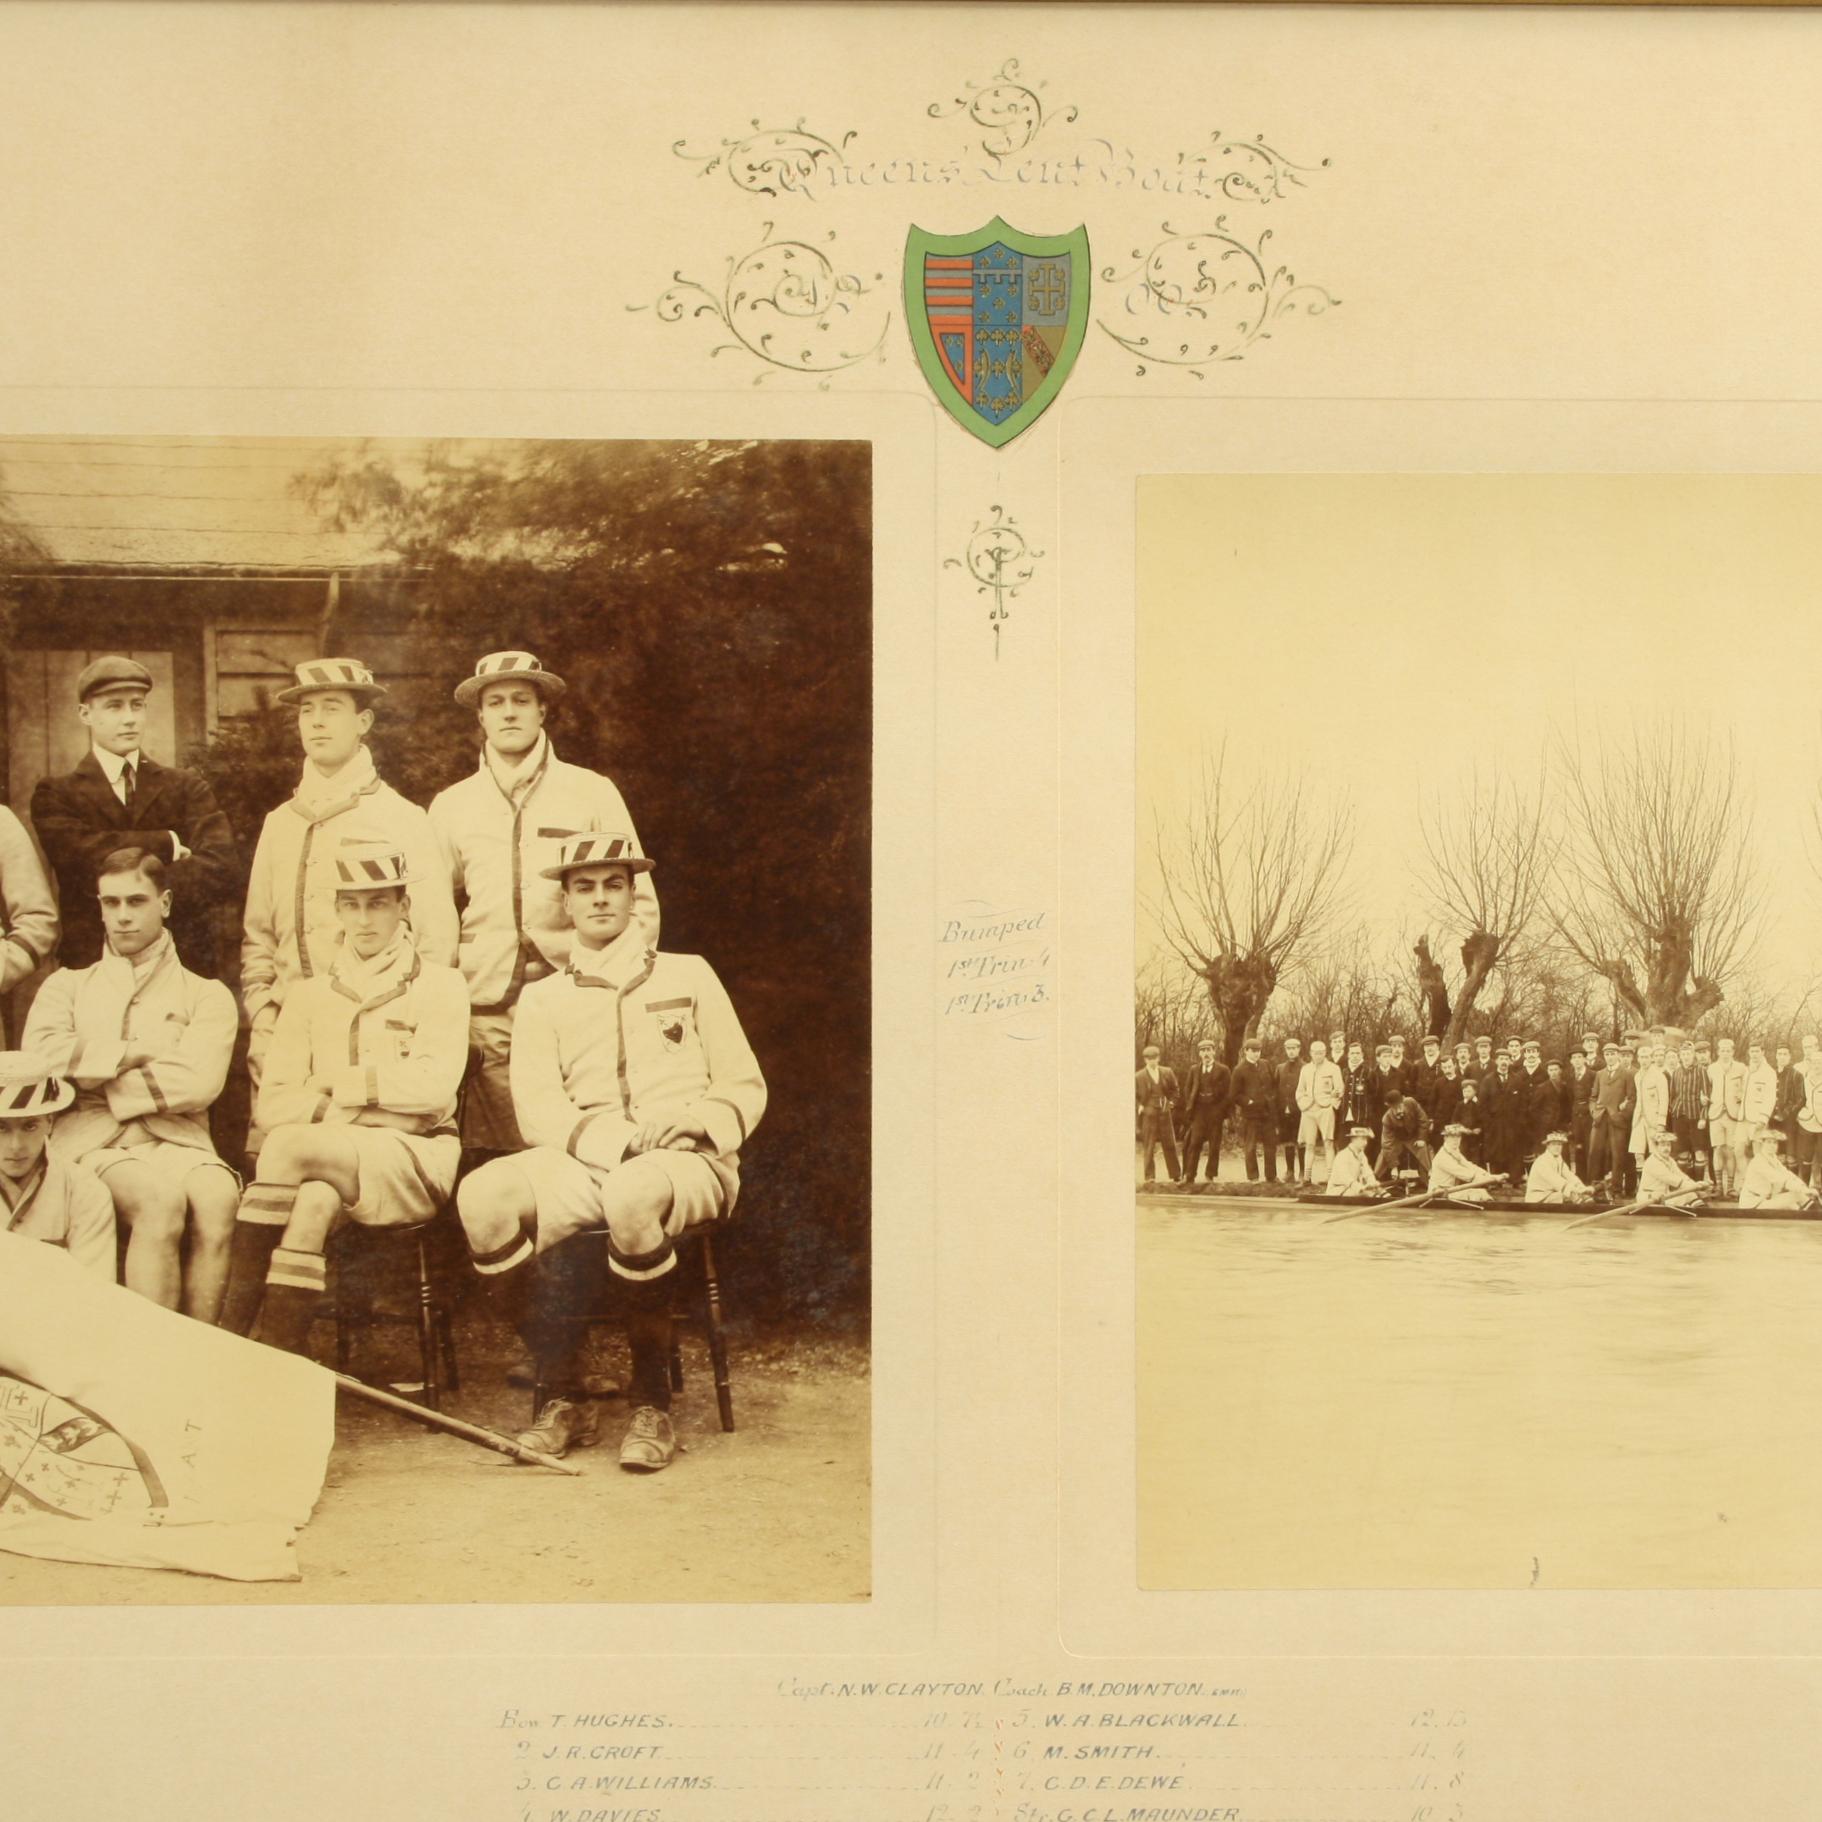 Cambridge University Queen's Double Rowing Photograph.
A good framed university rowing team photo of the 1900 Queen's Lent boat crew, Cambridge. The photos are framed in a traditional oak frame with gold slip with a team photo on the left and a